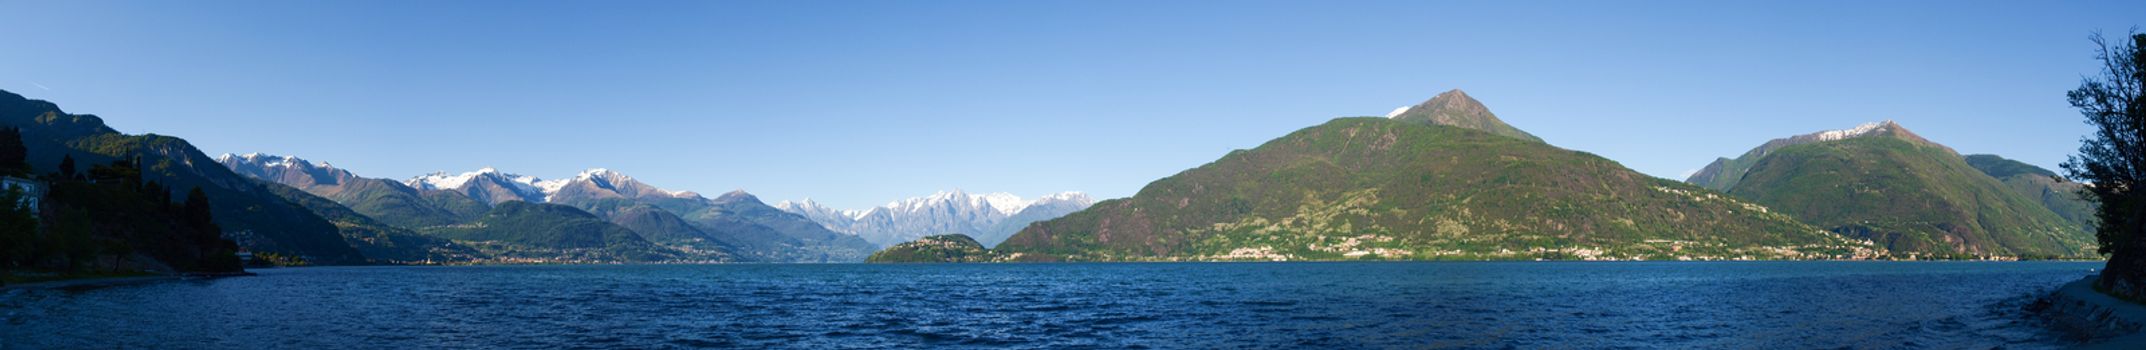 Pianello del Lario, Lake of Como, Italy: Panorama of the Lake of Como from the Beach at evening sunlight